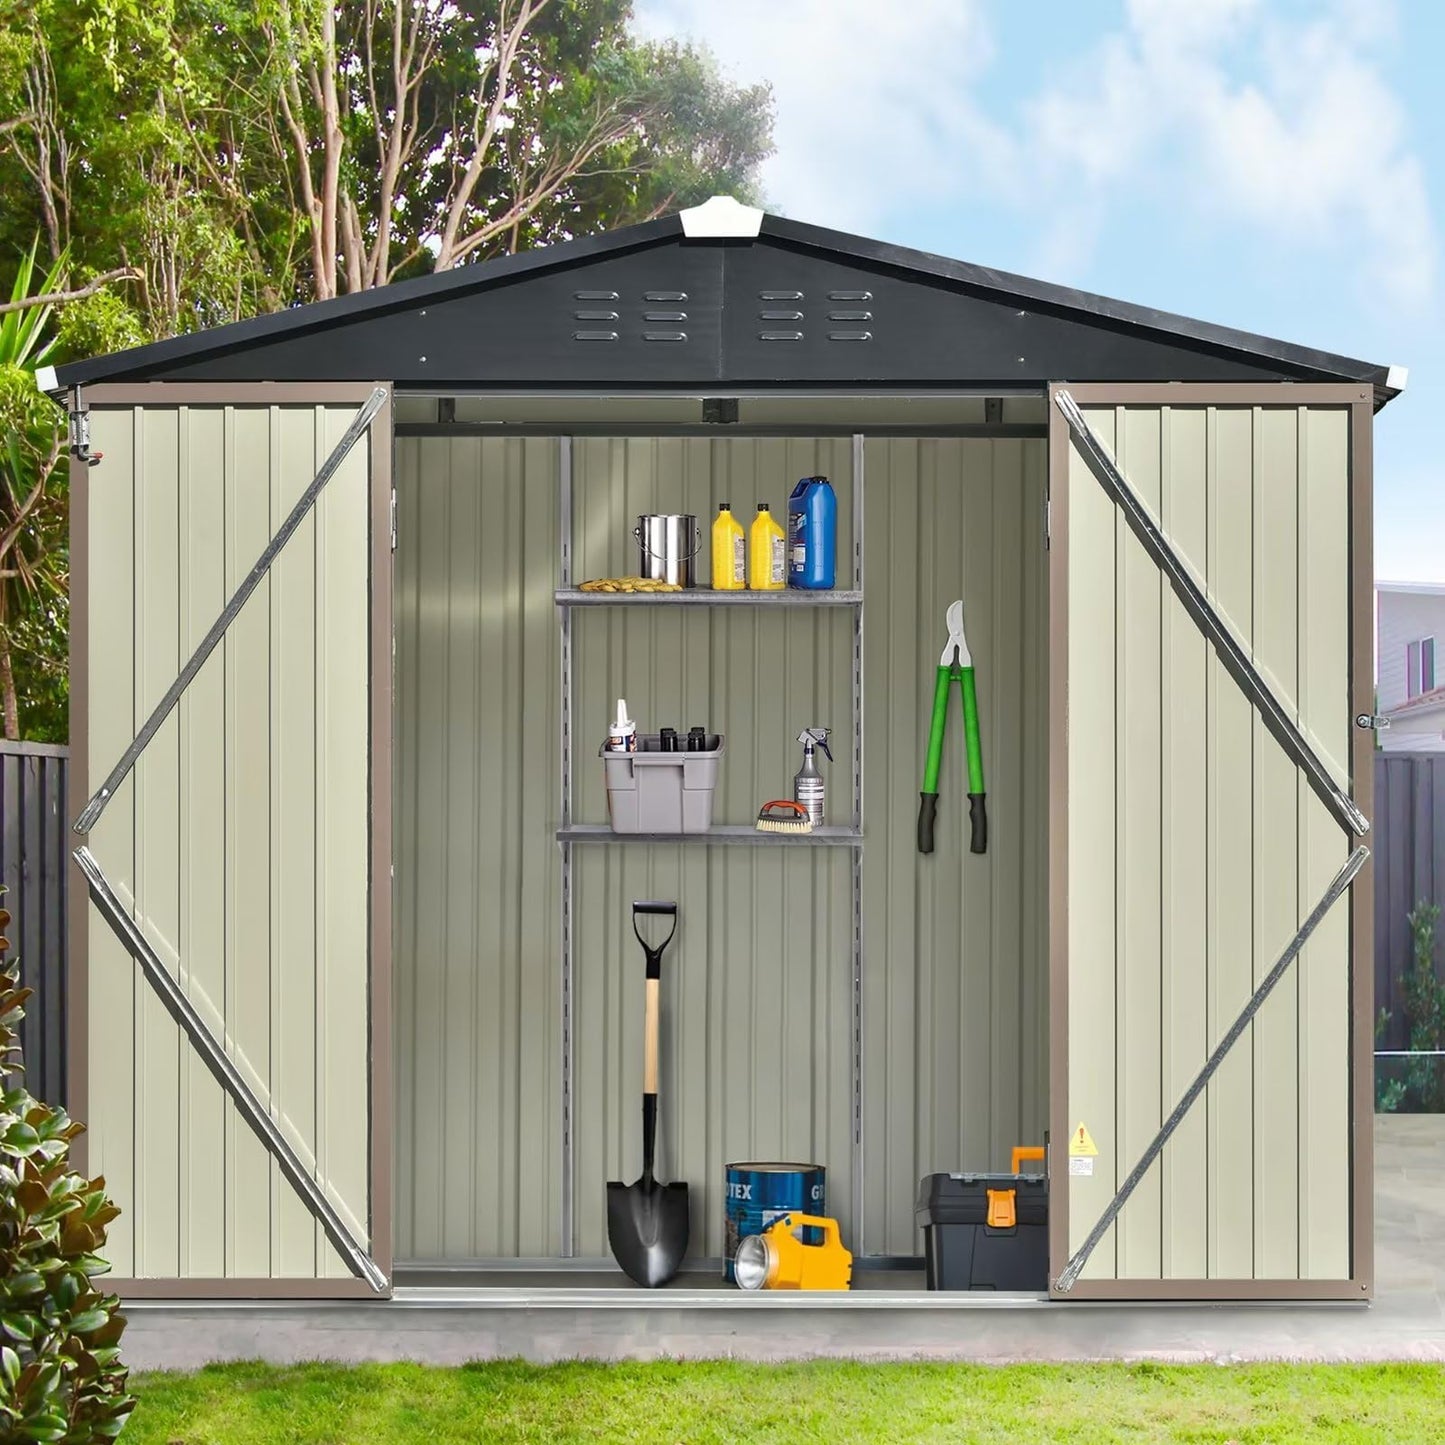 Plawden Metal Outdoor Storage Shed 8x6 FT Bike Shed Garden Shed, with Adjustable Shelf and Lockable Doors, Tool Cabinet with Vents and Foundation Frame for Backyard, Lawn, Garden, Brown 8 x 6 FT Brown